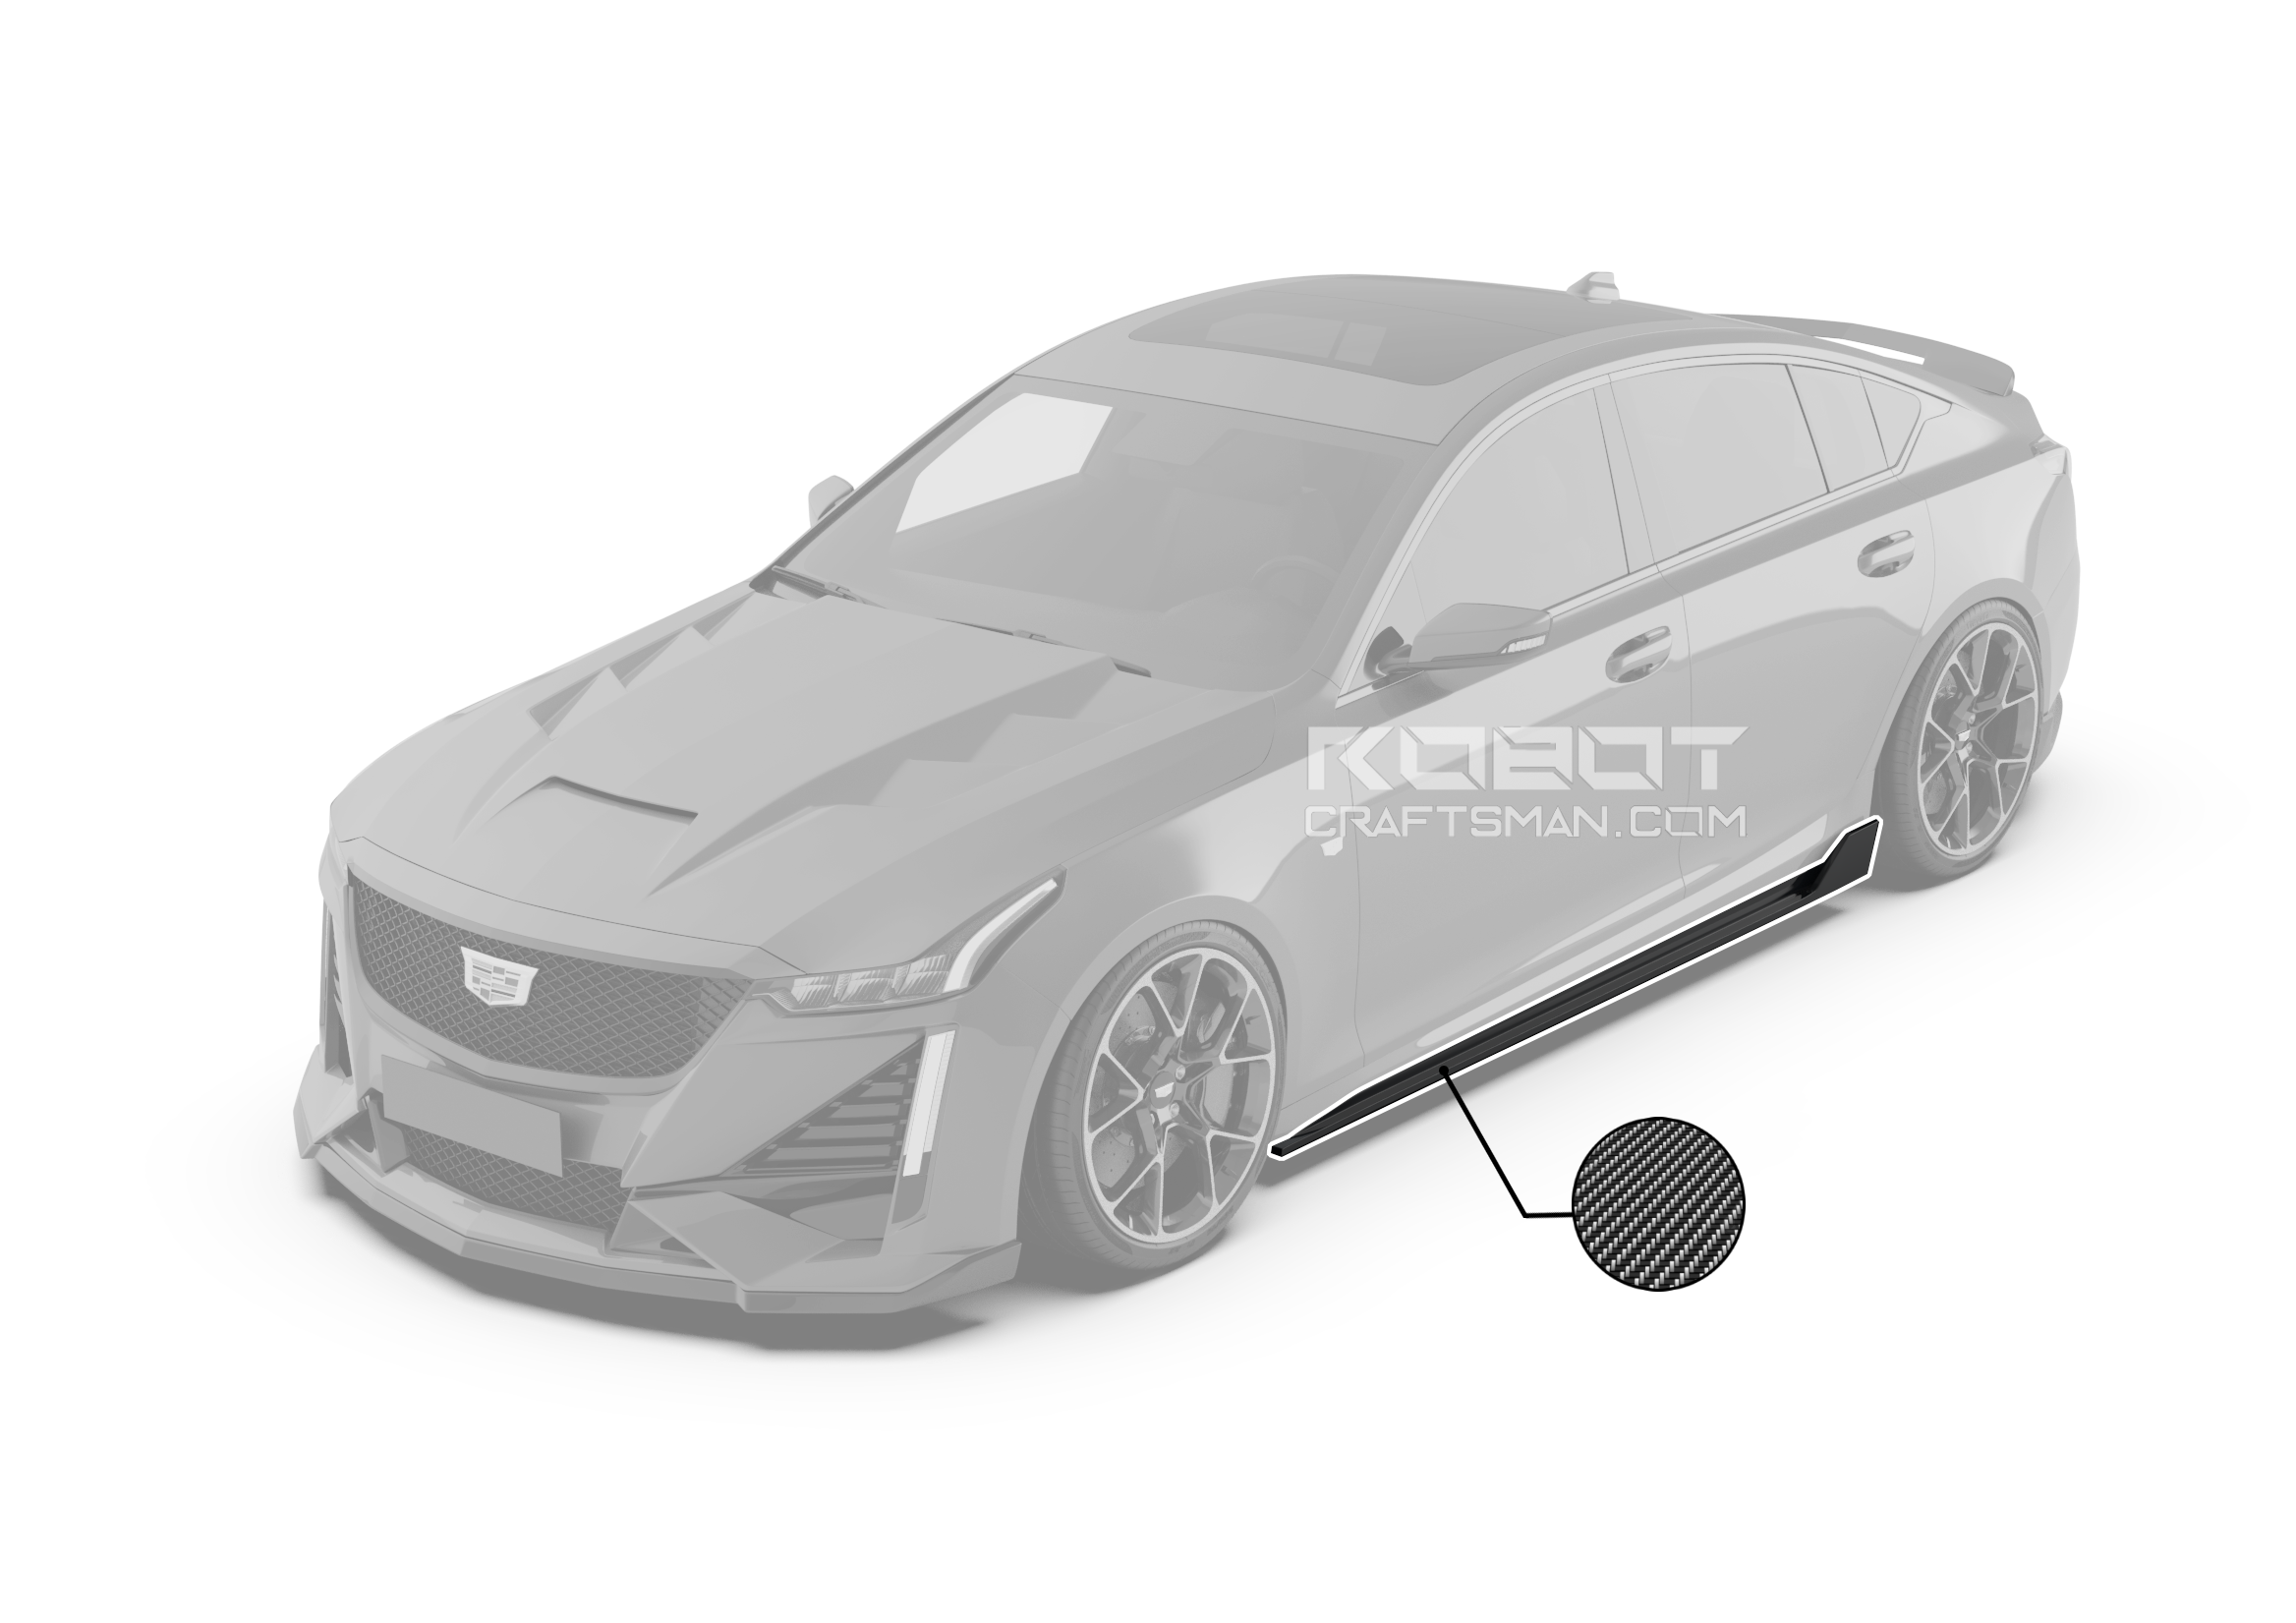 ROBOT CRAFTSMAN "PRISM" Side Skirts Extensions For Cadillac CT5 FRP or Carbon Fiber